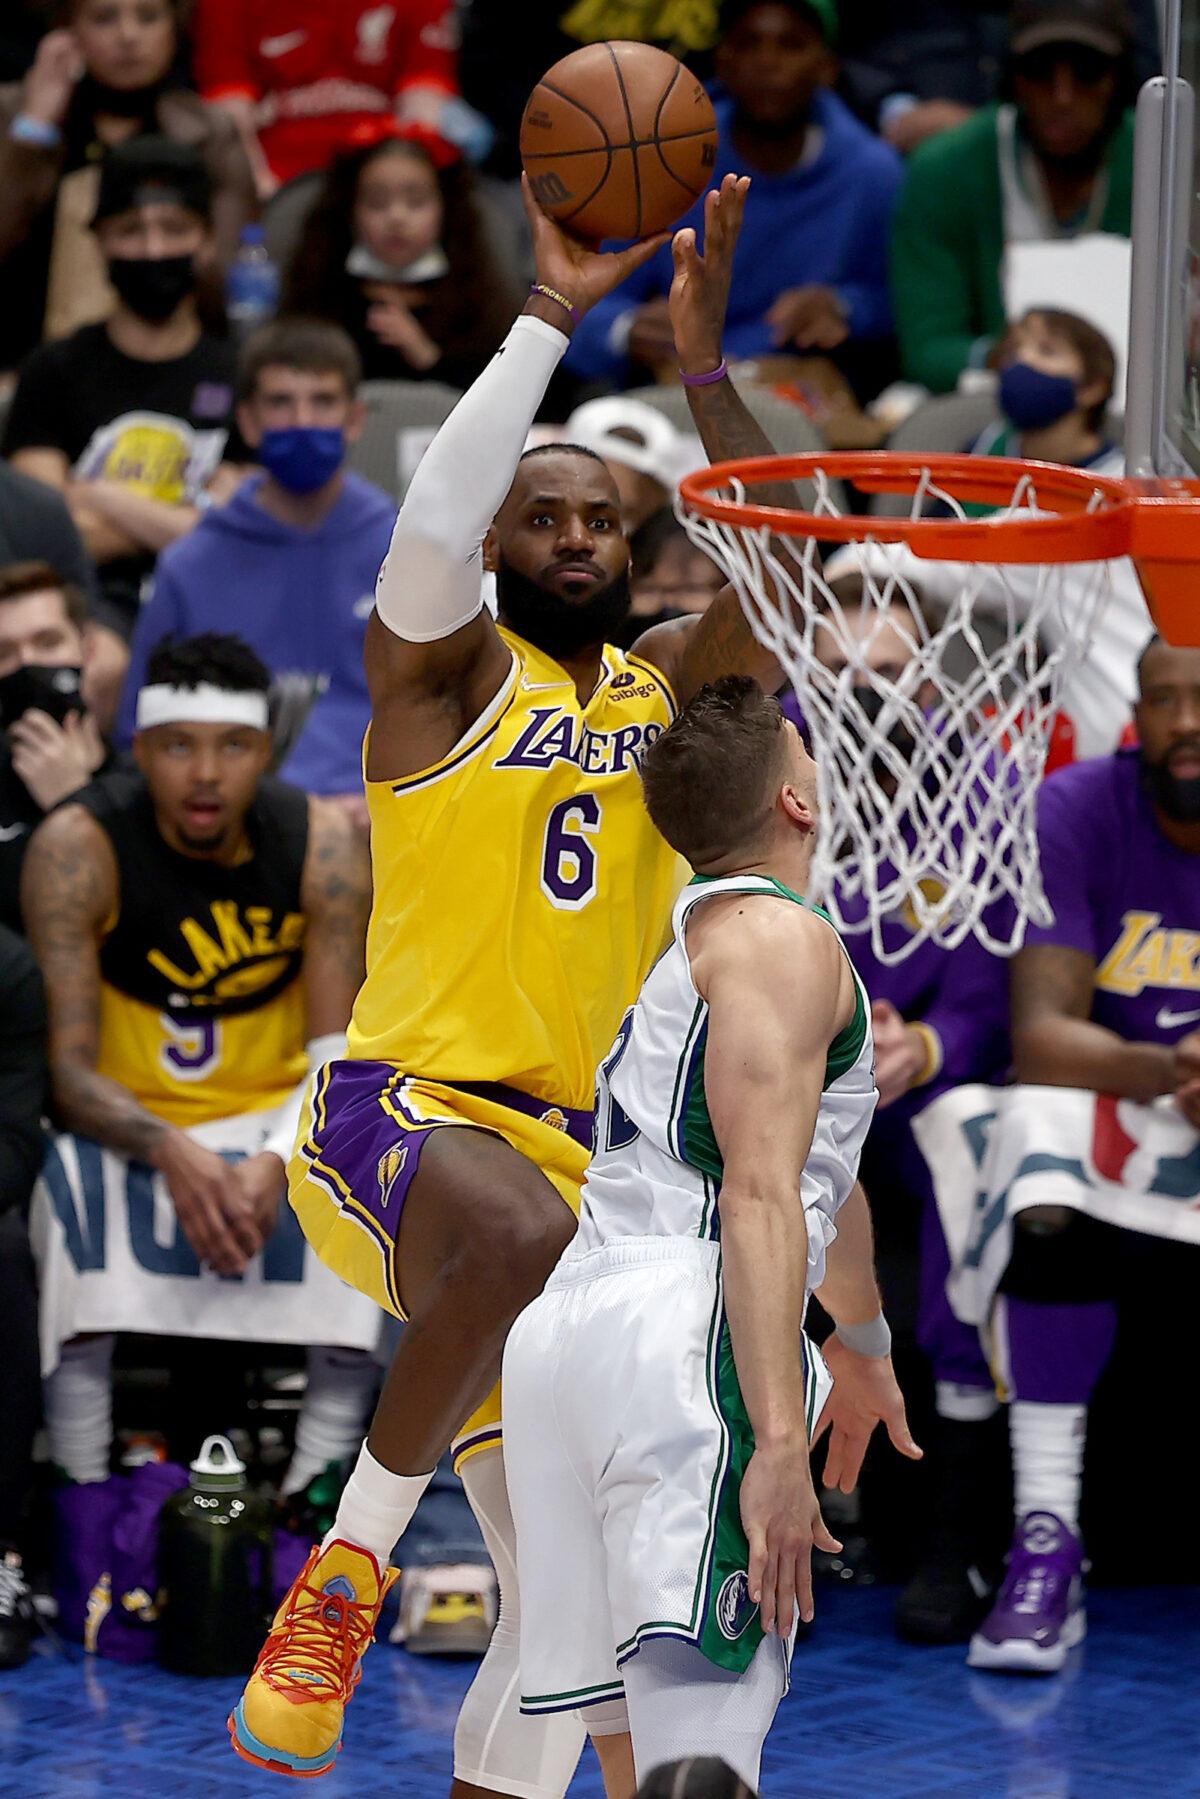 LeBron James #6 of the Los Angeles Lakers shoots the ball against Maxi Kleber #42 of the Dallas Mavericks in the first half at American Airlines Center in Dallas, on Dec. 15, 2021. (Tom Pennington/Getty Images)